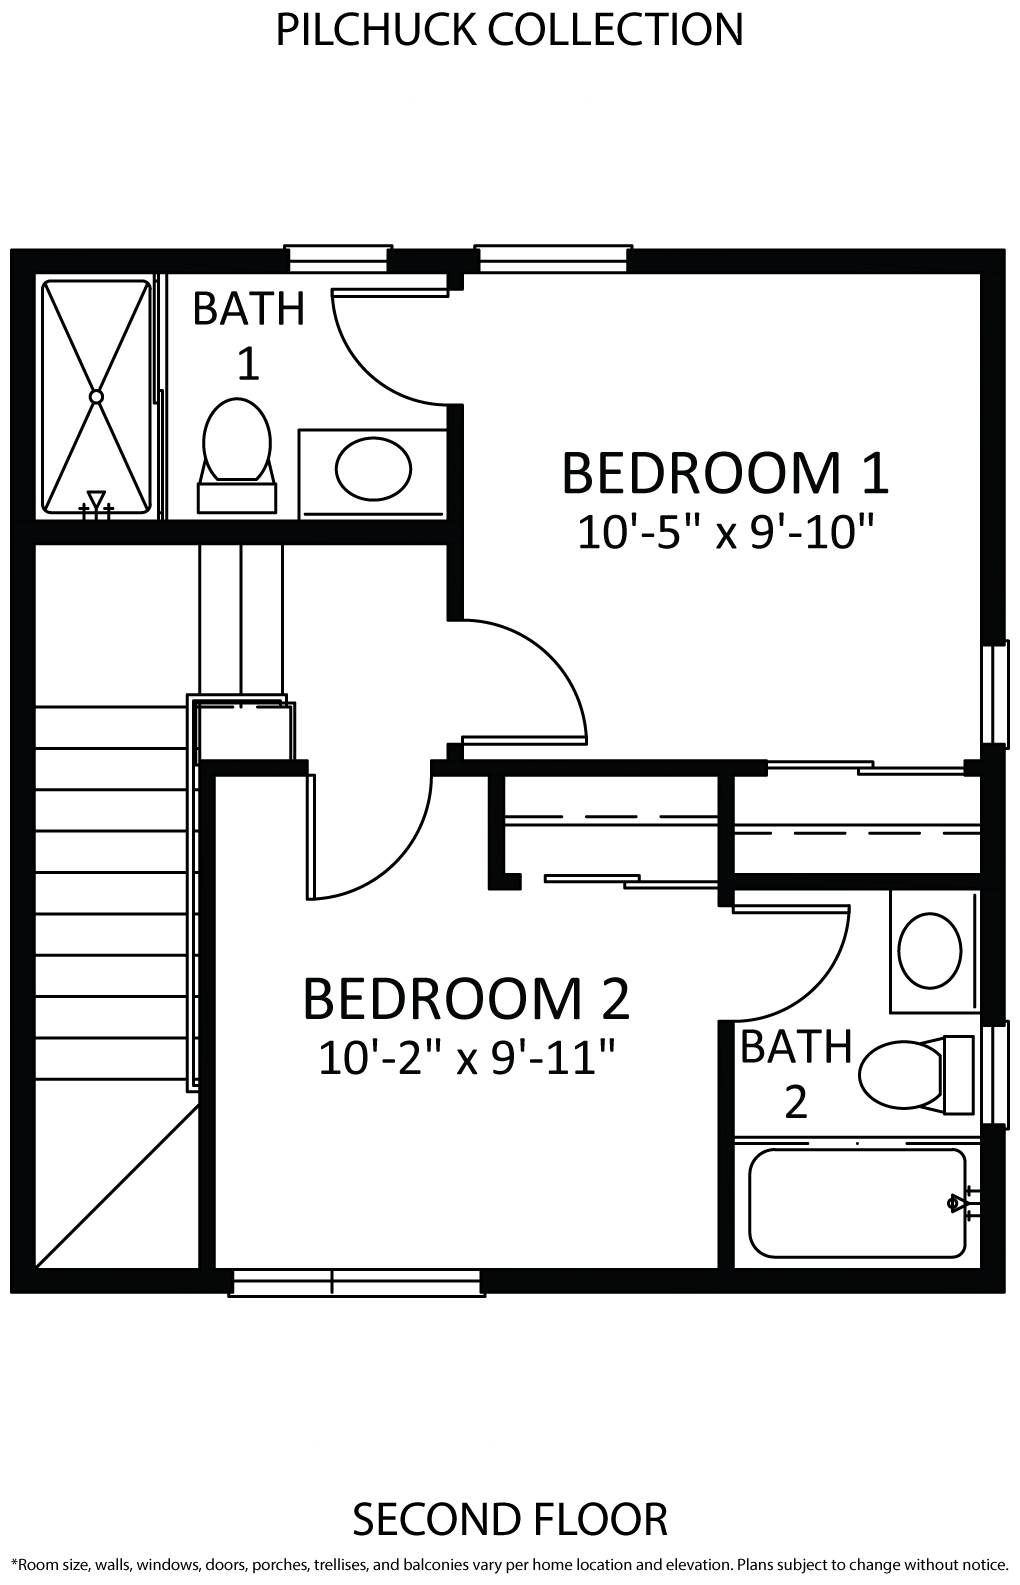 Floorplan 02. TJH_7546_26th_Ave_NW_C_Pilchuck_2.jpg for 7544 26th Avenue NW